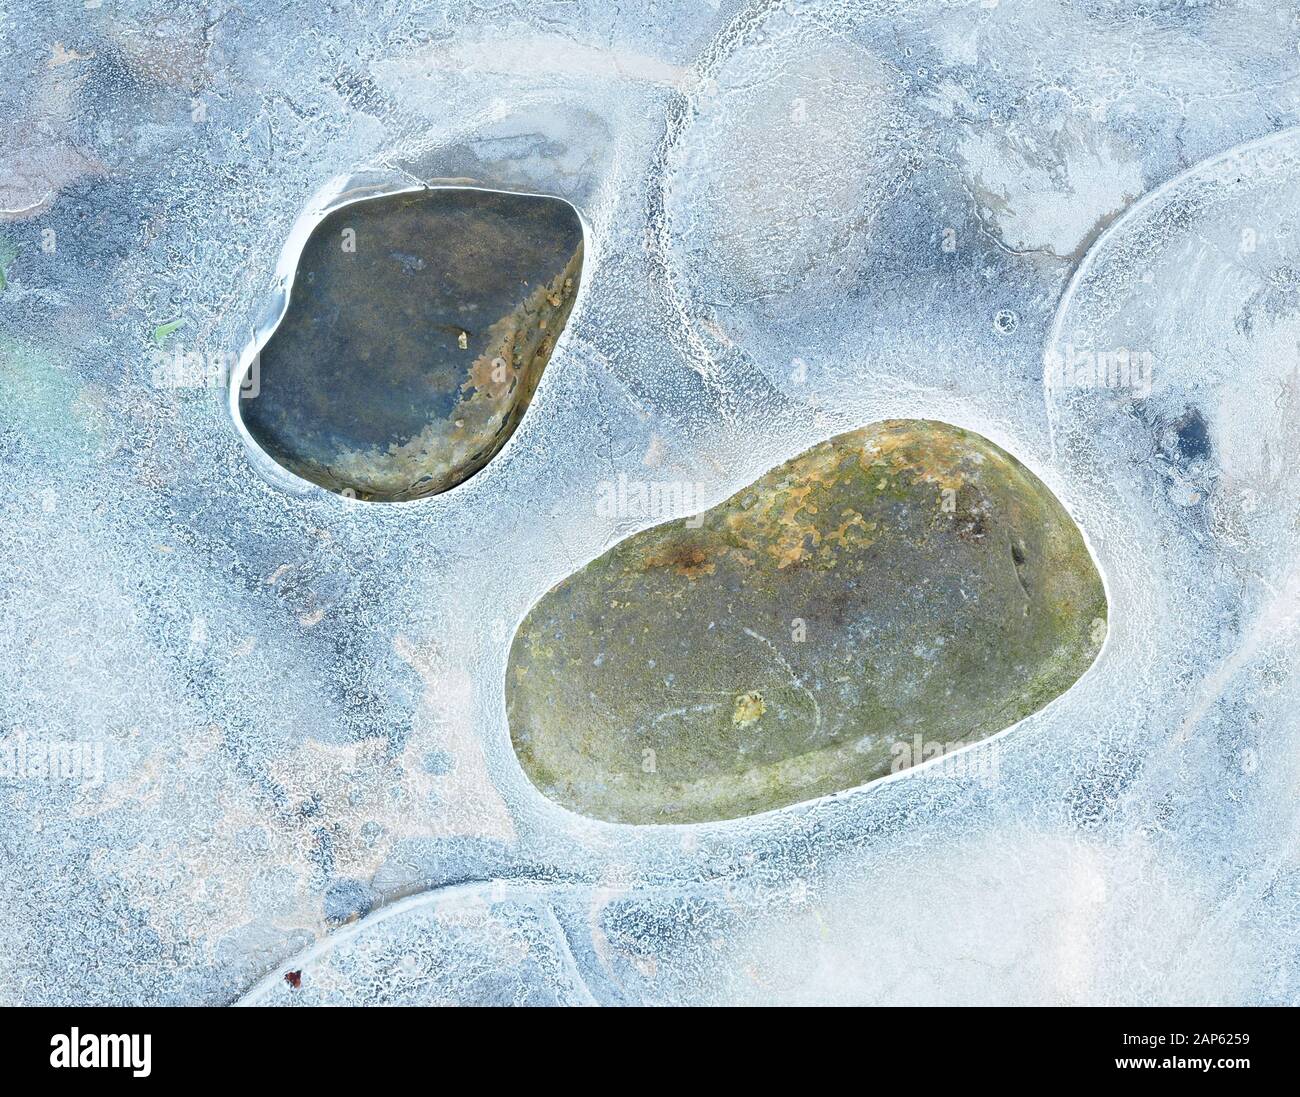 Abstract image of two stones surrounded by ice Stock Photo